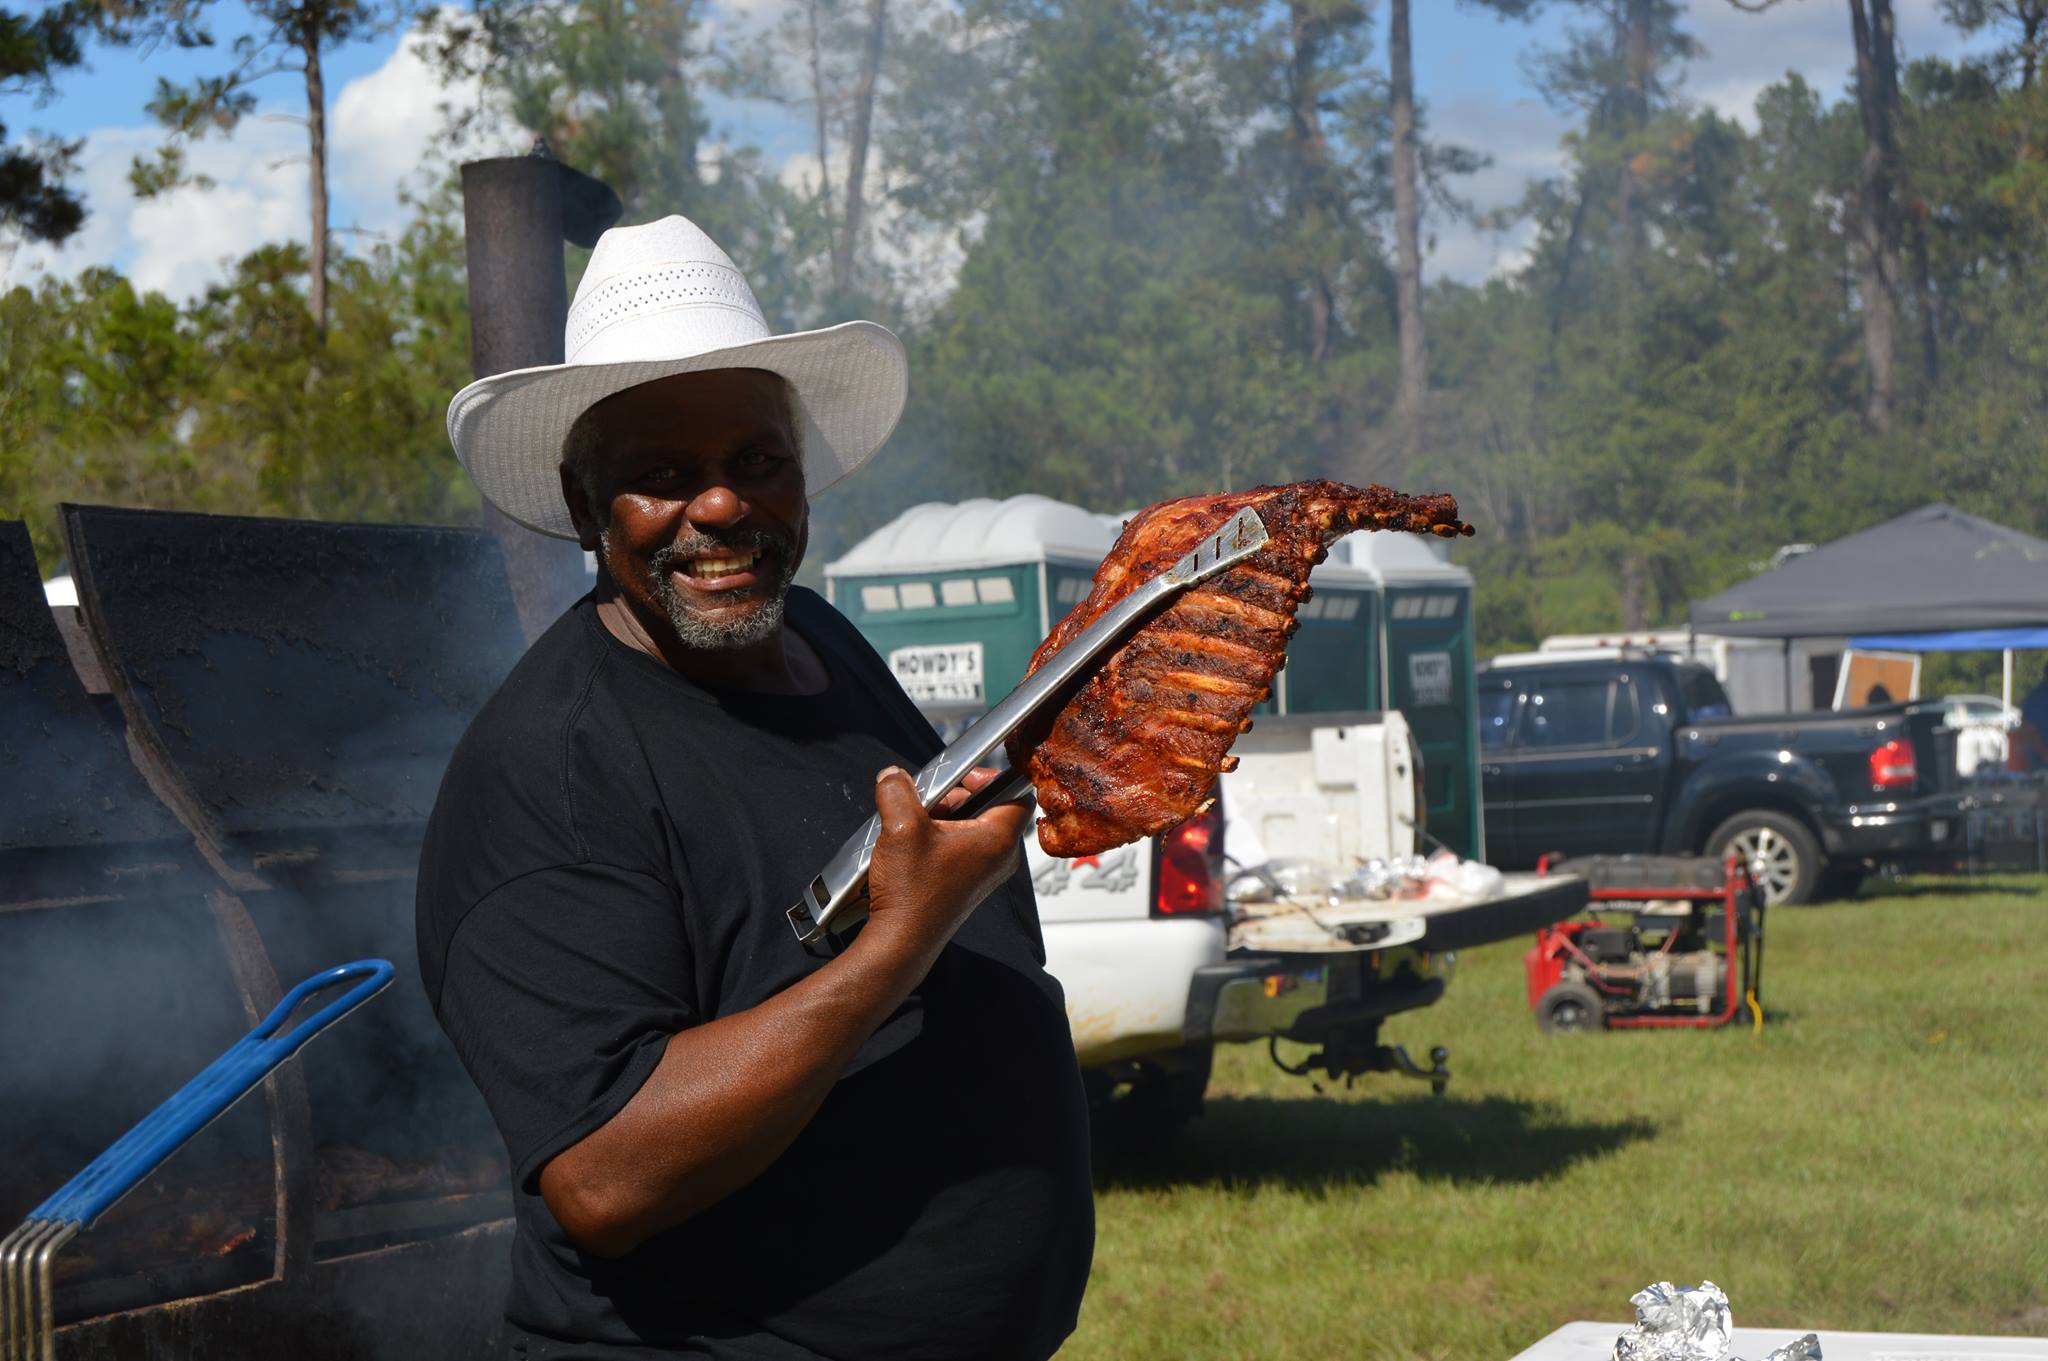 Jefferson's County Fair and BBQ Cook-Off